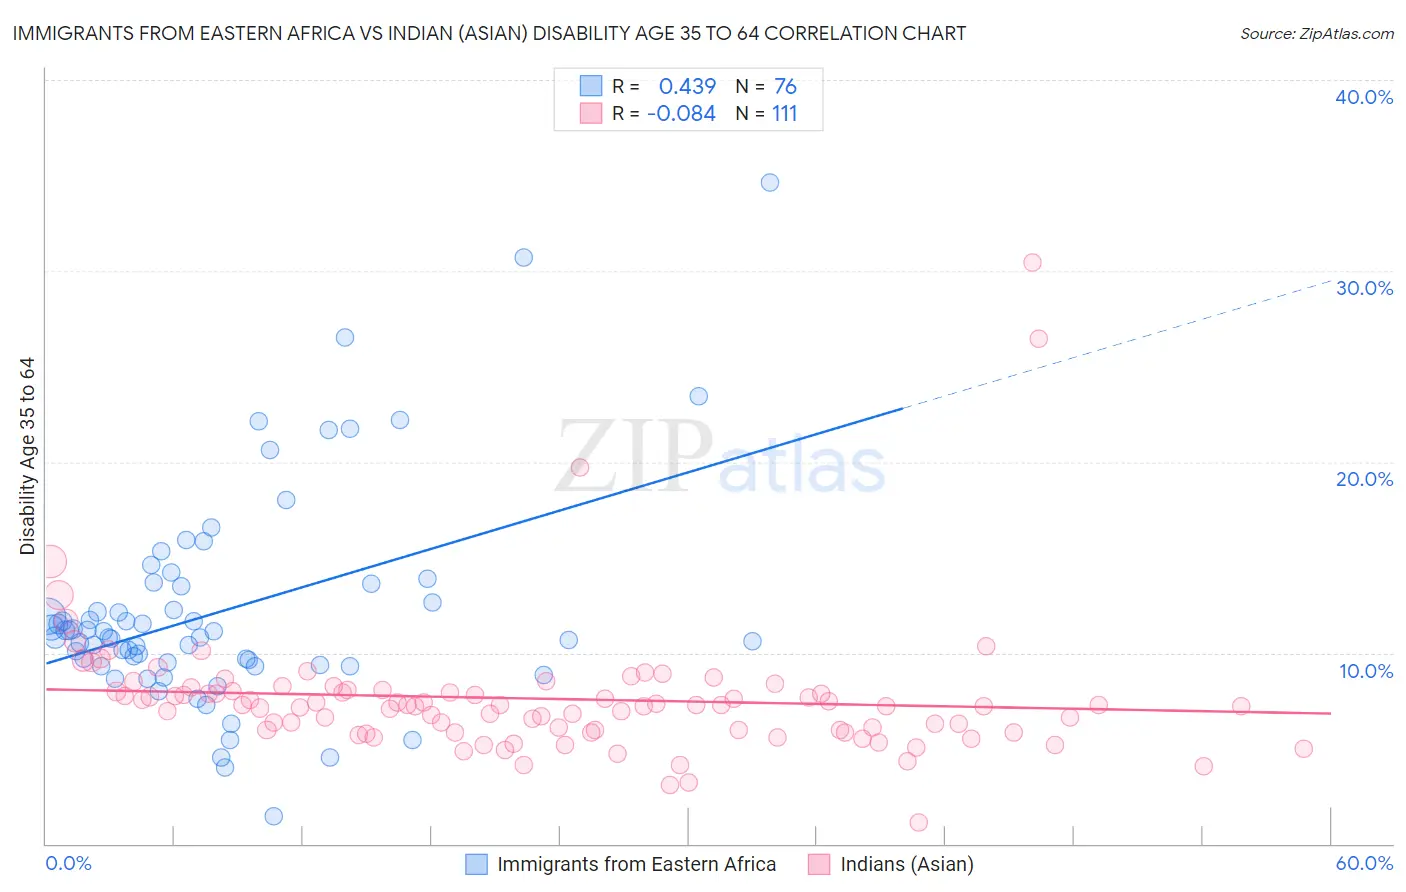 Immigrants from Eastern Africa vs Indian (Asian) Disability Age 35 to 64